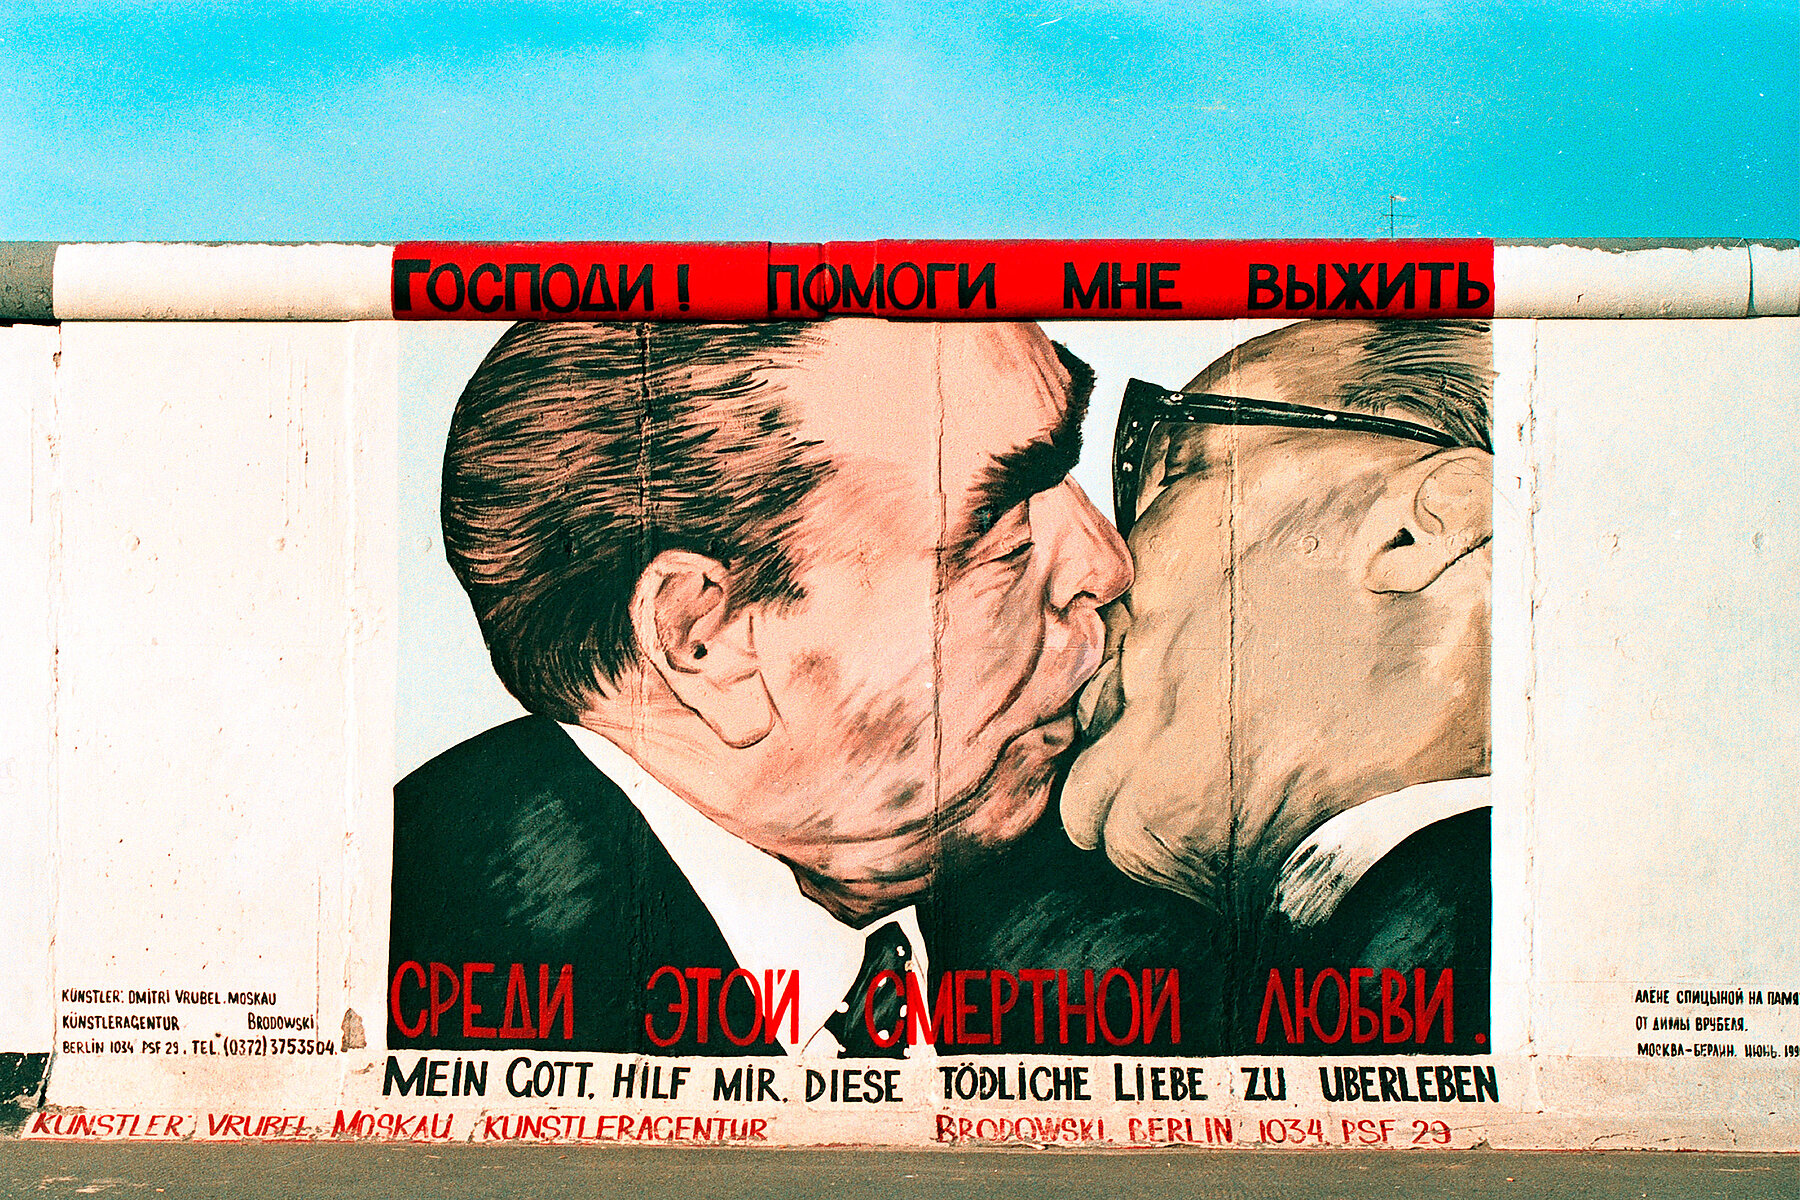 Painted picture on the Berlin Wall. It depicts Leonid Brezhnev on the left and Erich Honecker on the right kissing on the mouth.